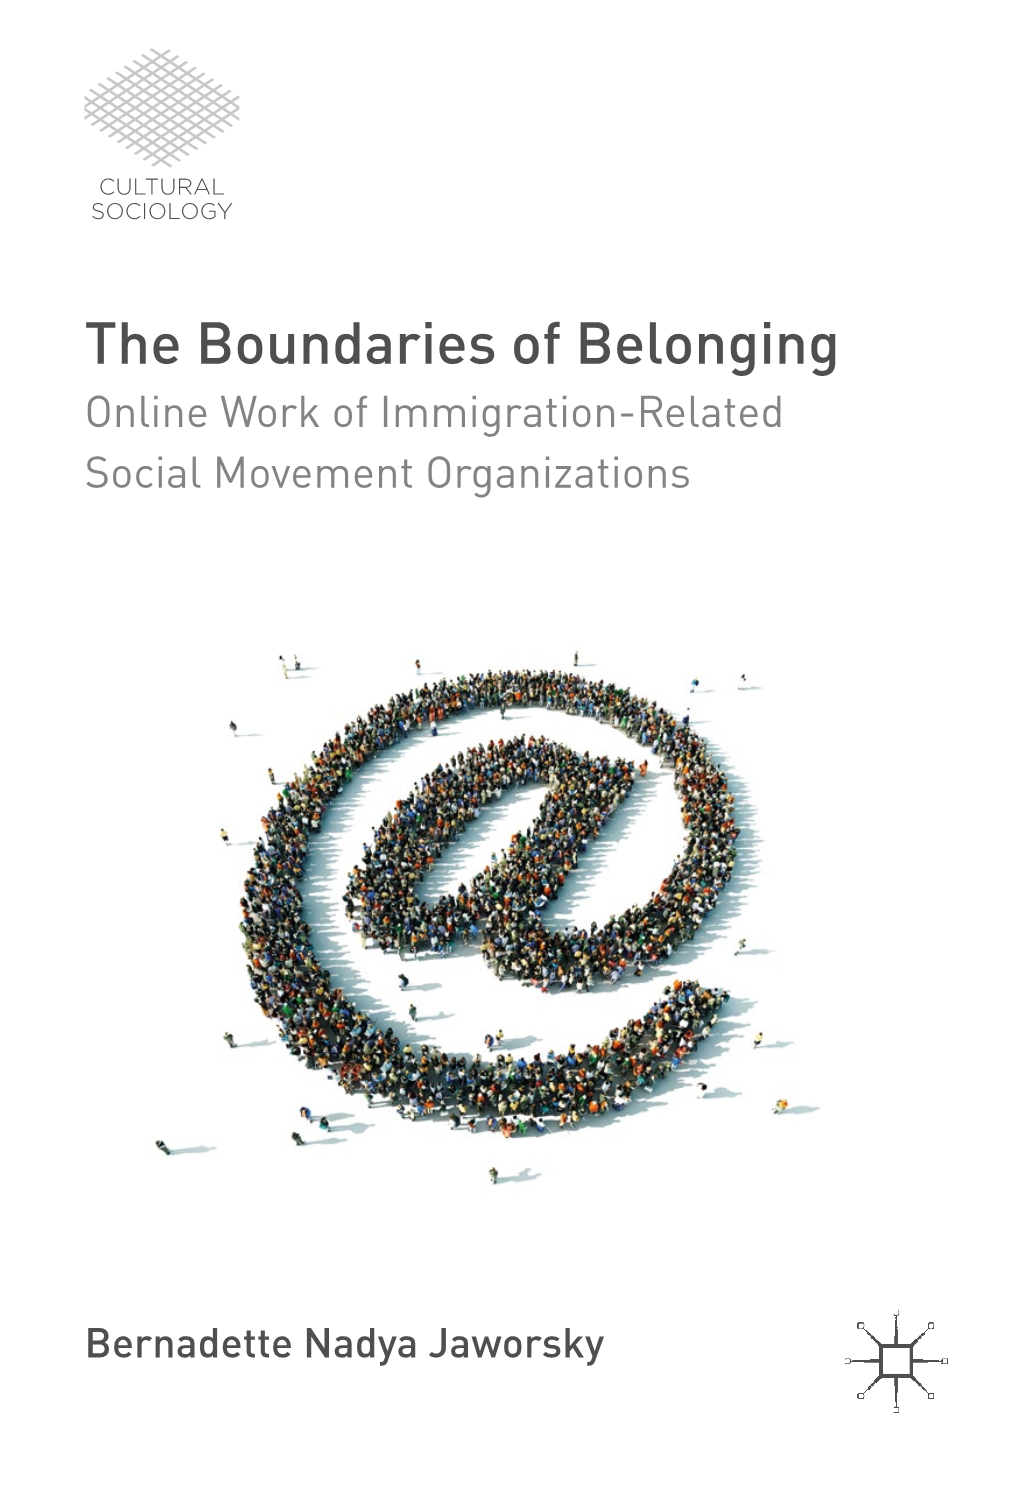 The Boundaries of Belonging Online Work of Immigration-Related Social Movement Organizations